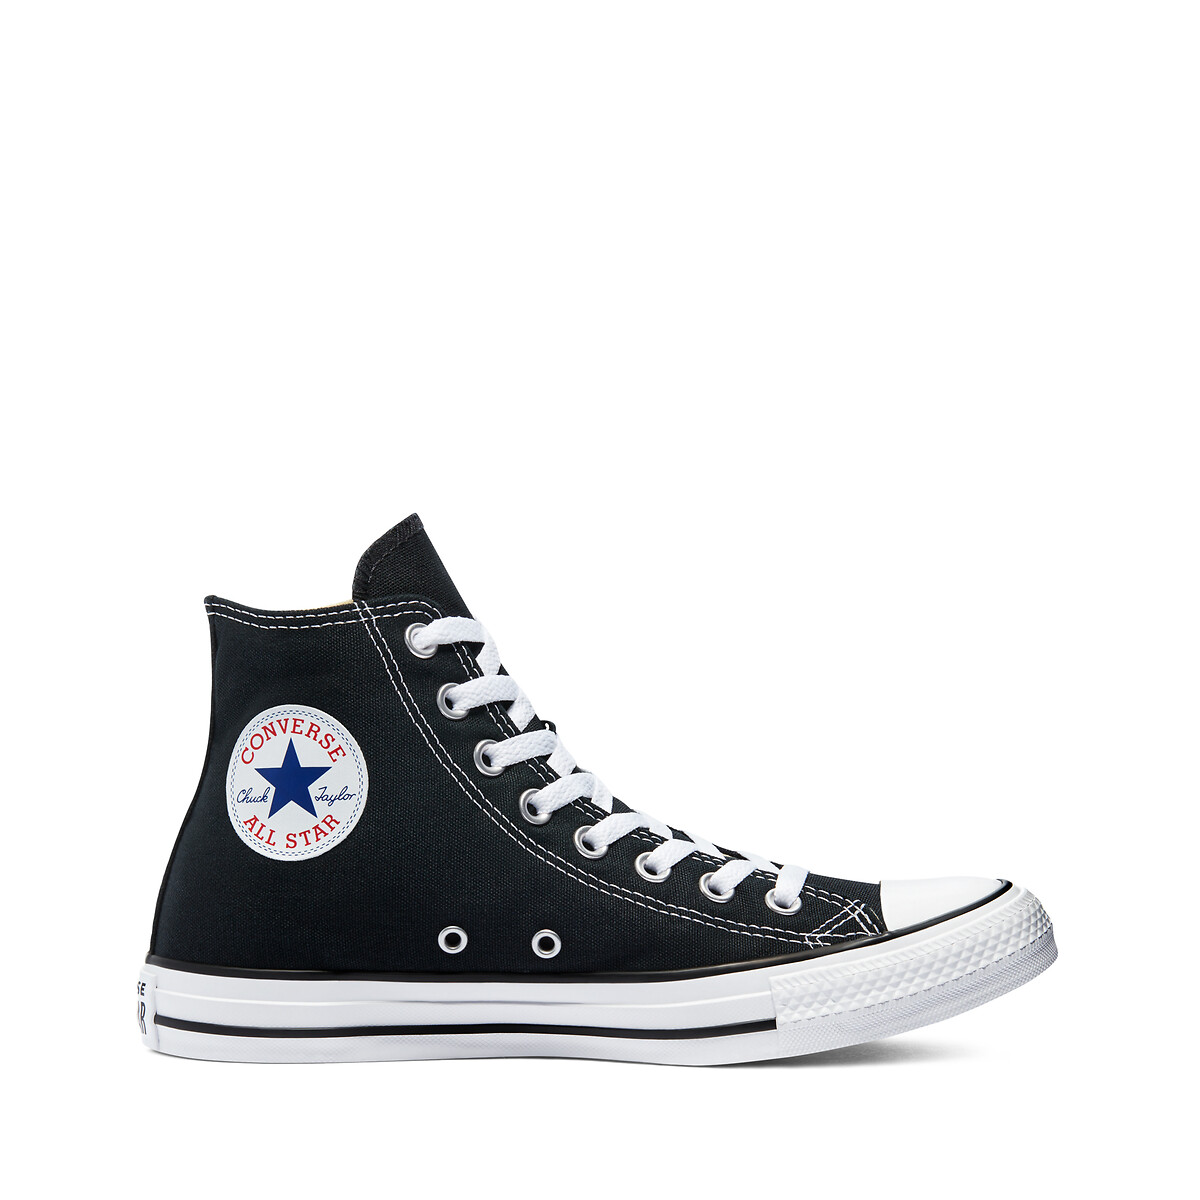 Chuck taylor all star core canvas high top trainers , black, Converse ...